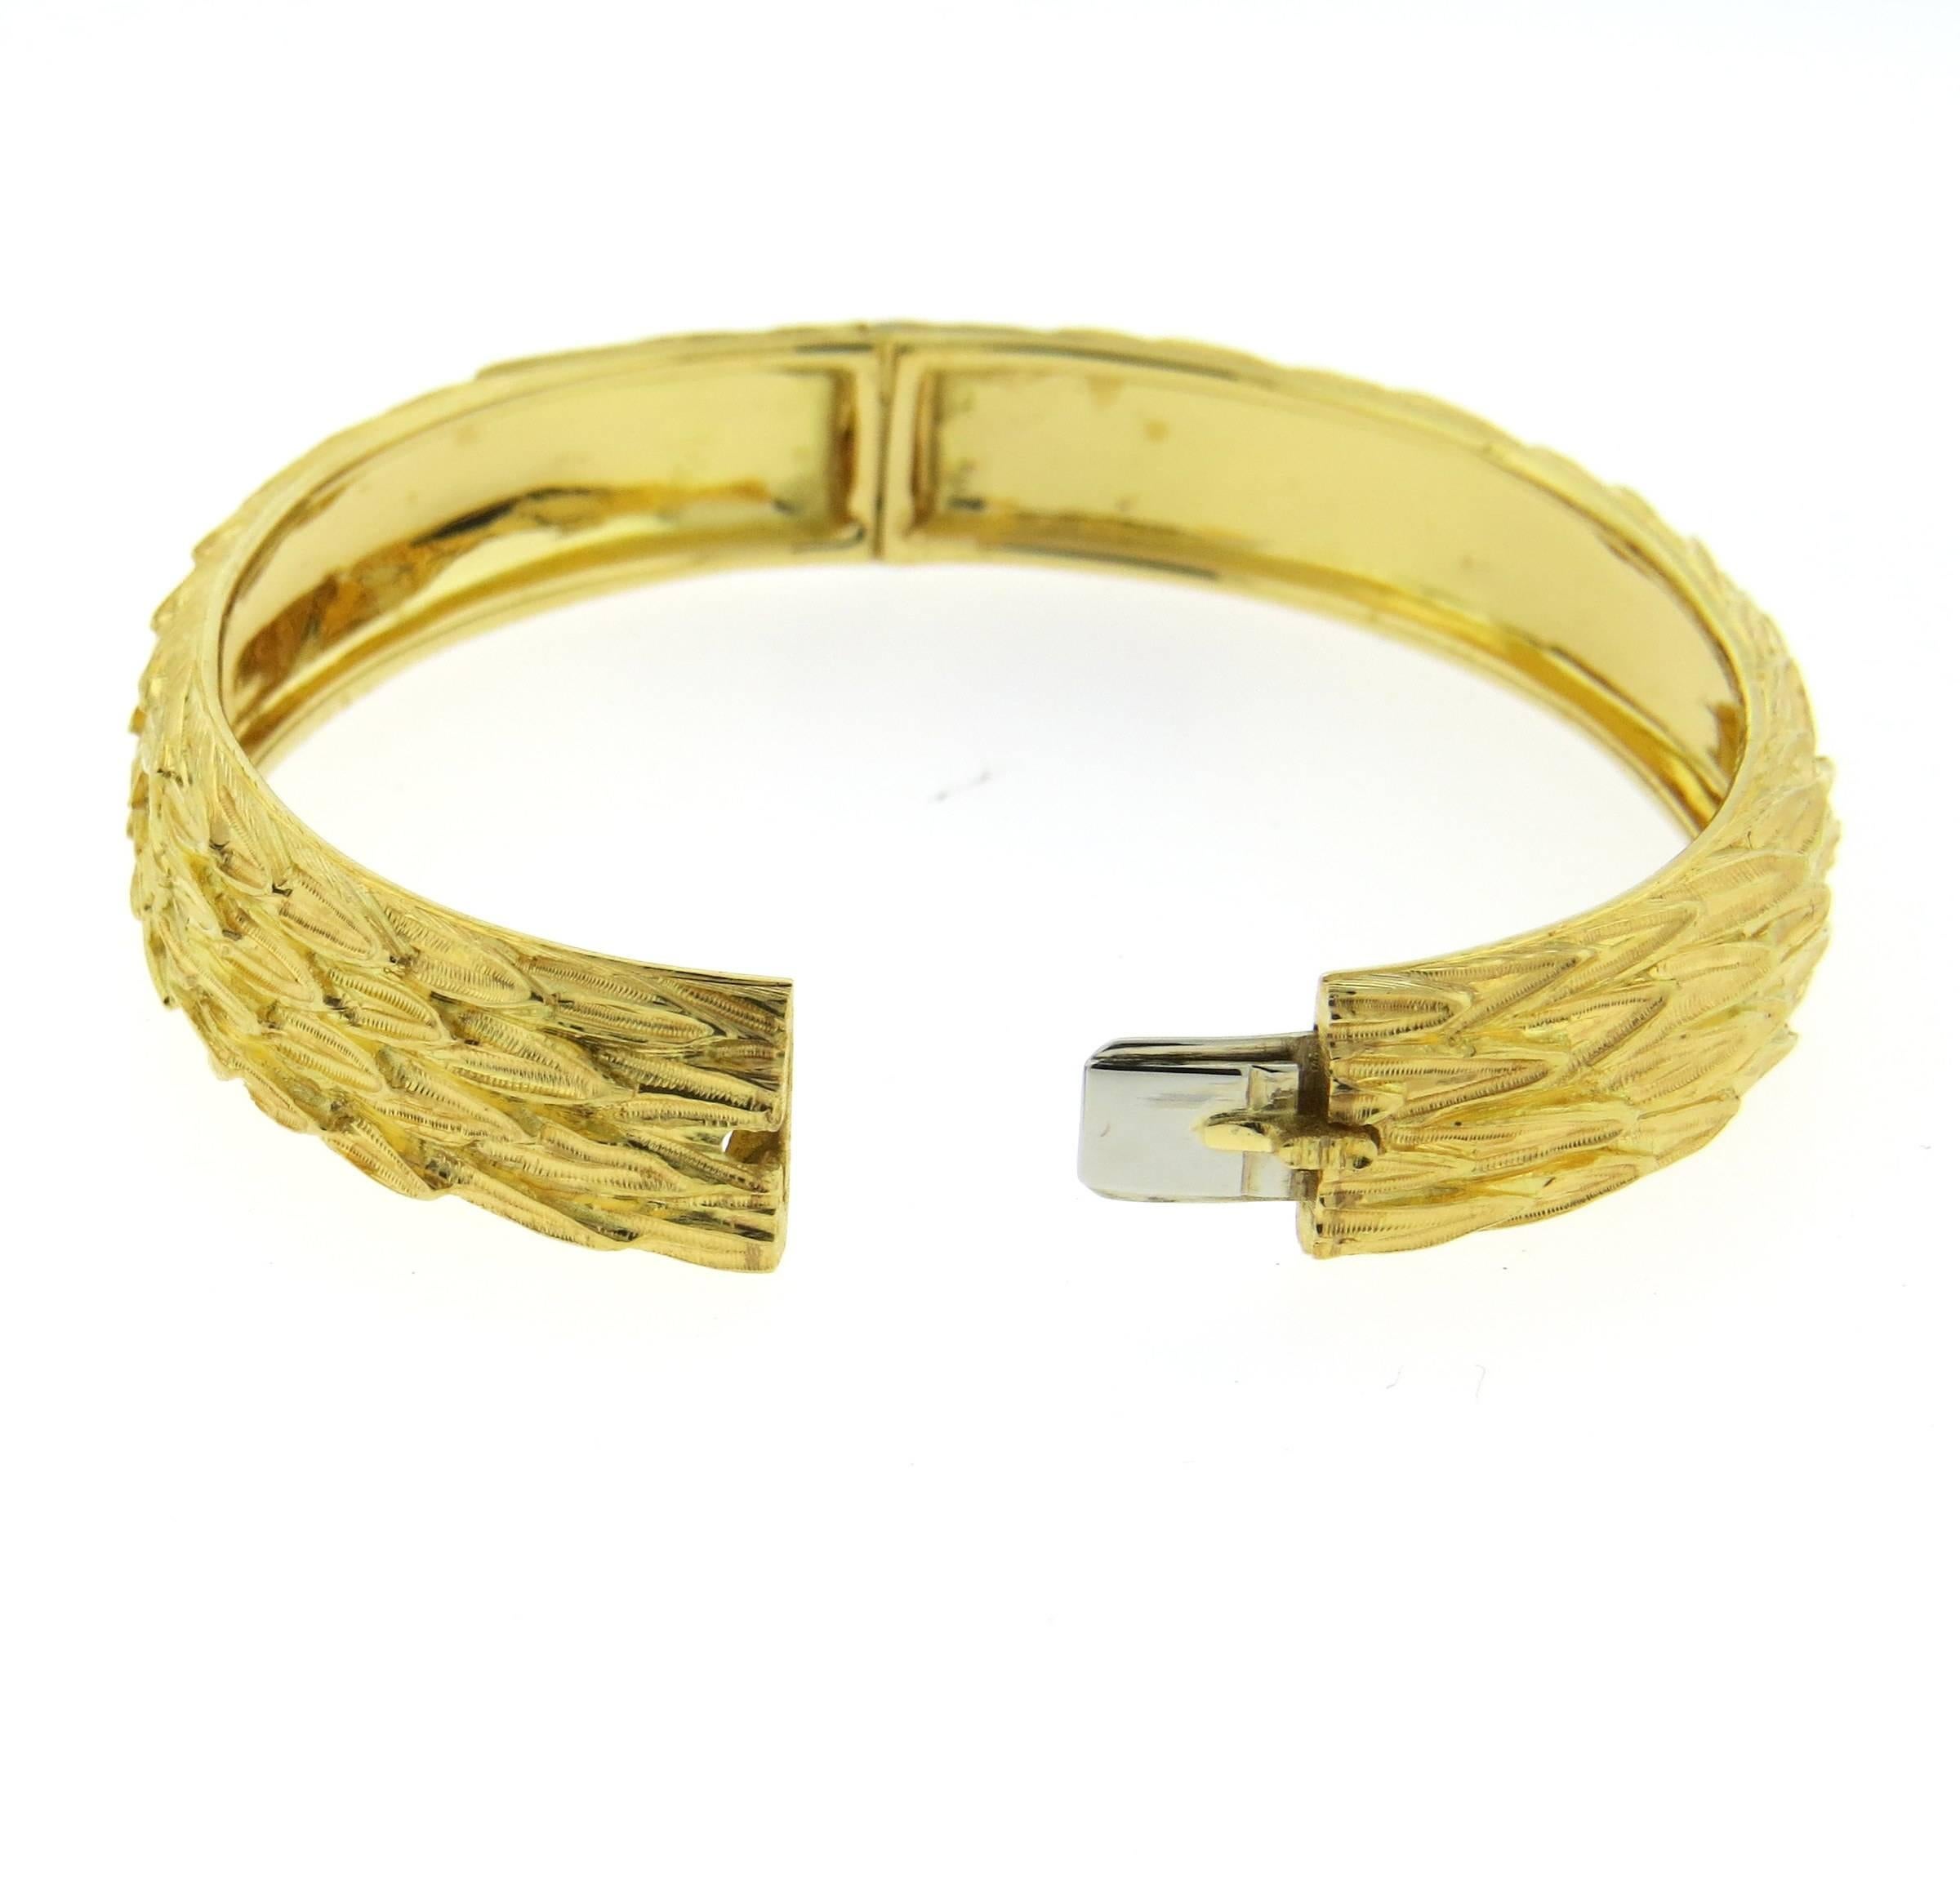 An 18k yellow gold textured finish bangle bracelet, crafted by Buccellati. Bracelet will comfortably fit up to 7